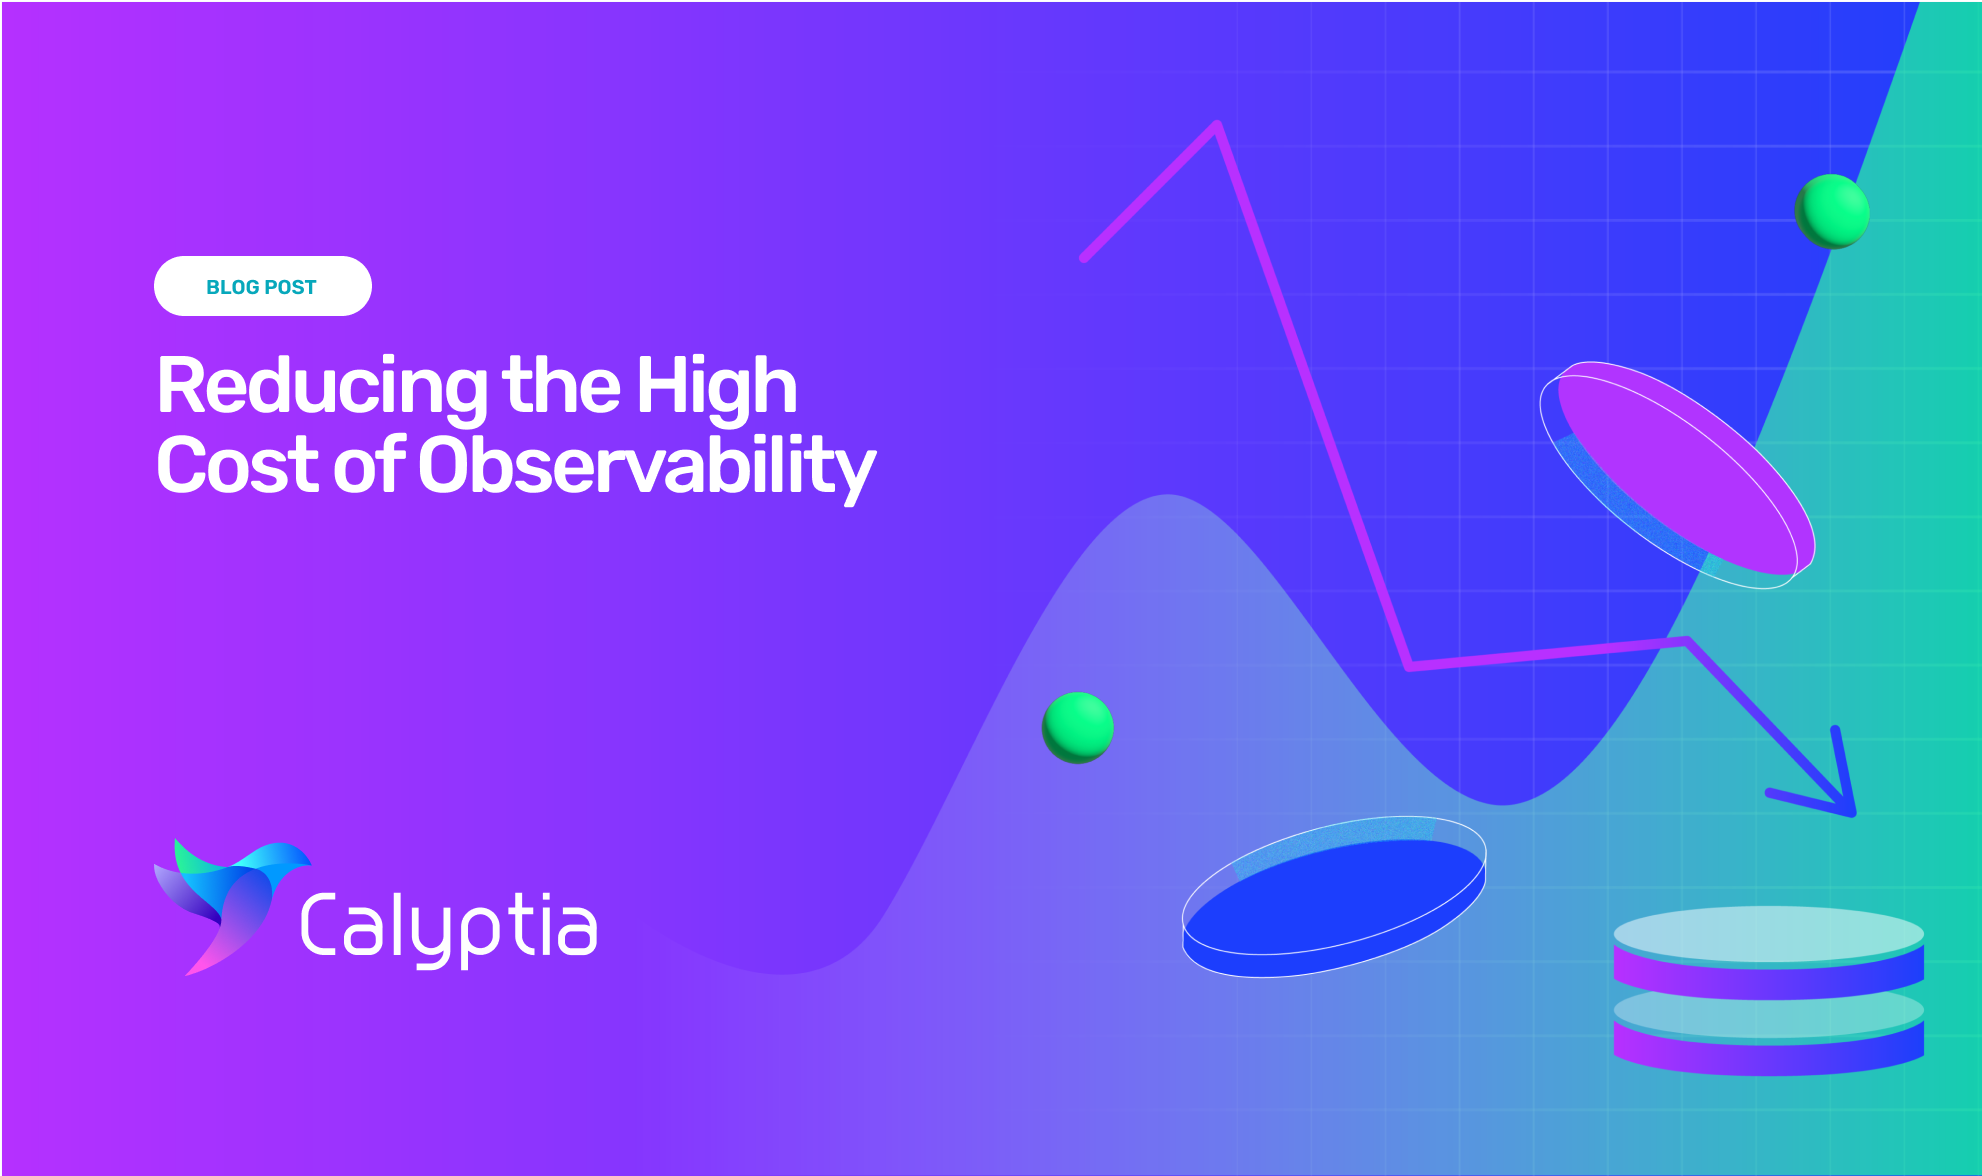 Reducing the high cost of observability